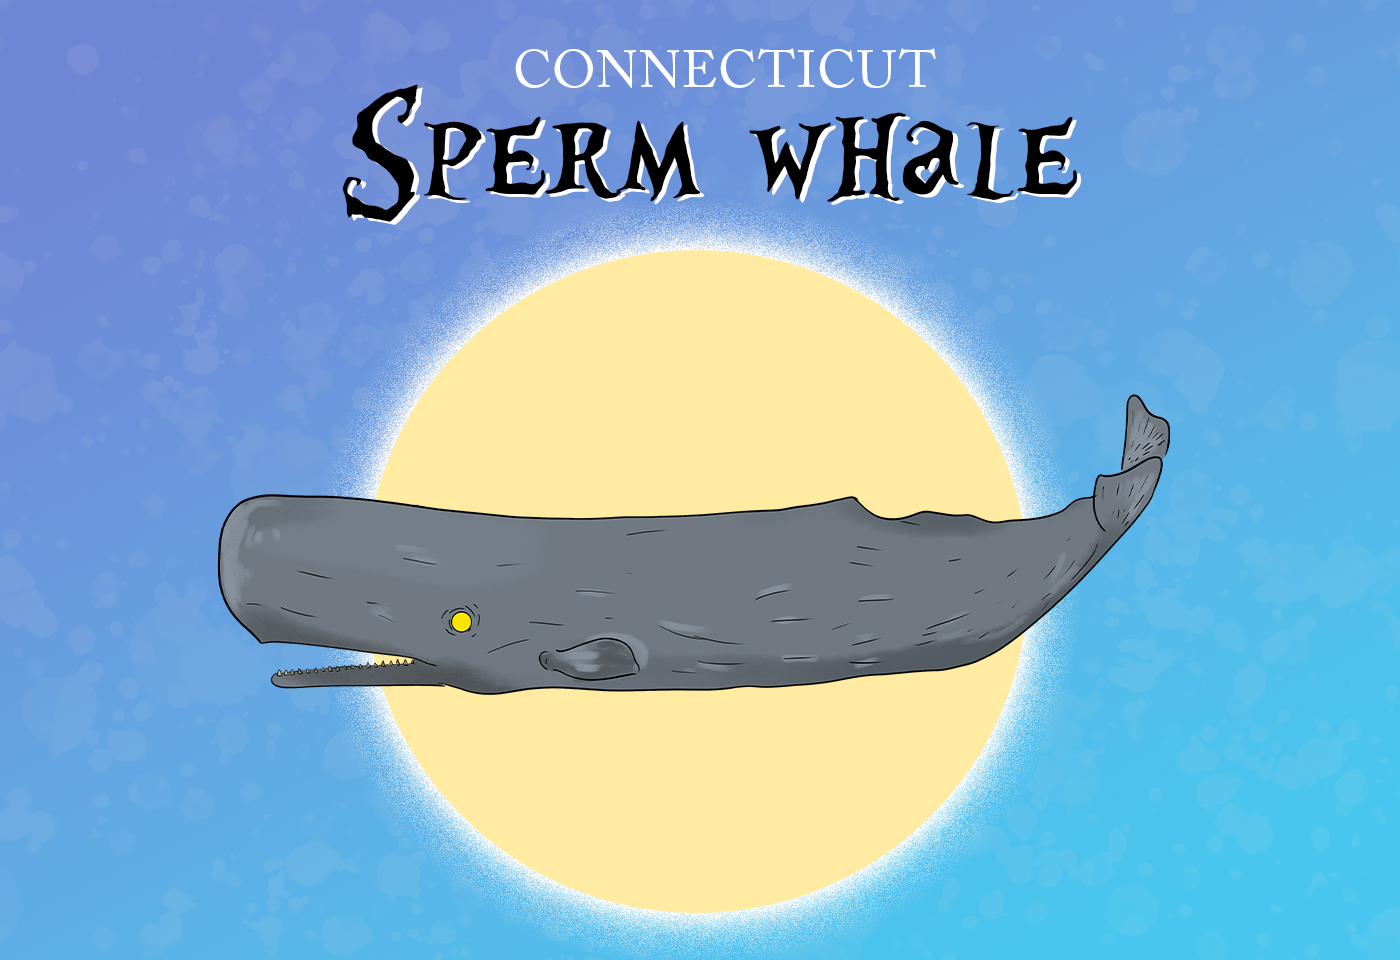 Official State Animal of Connecticut: Sperm Whale